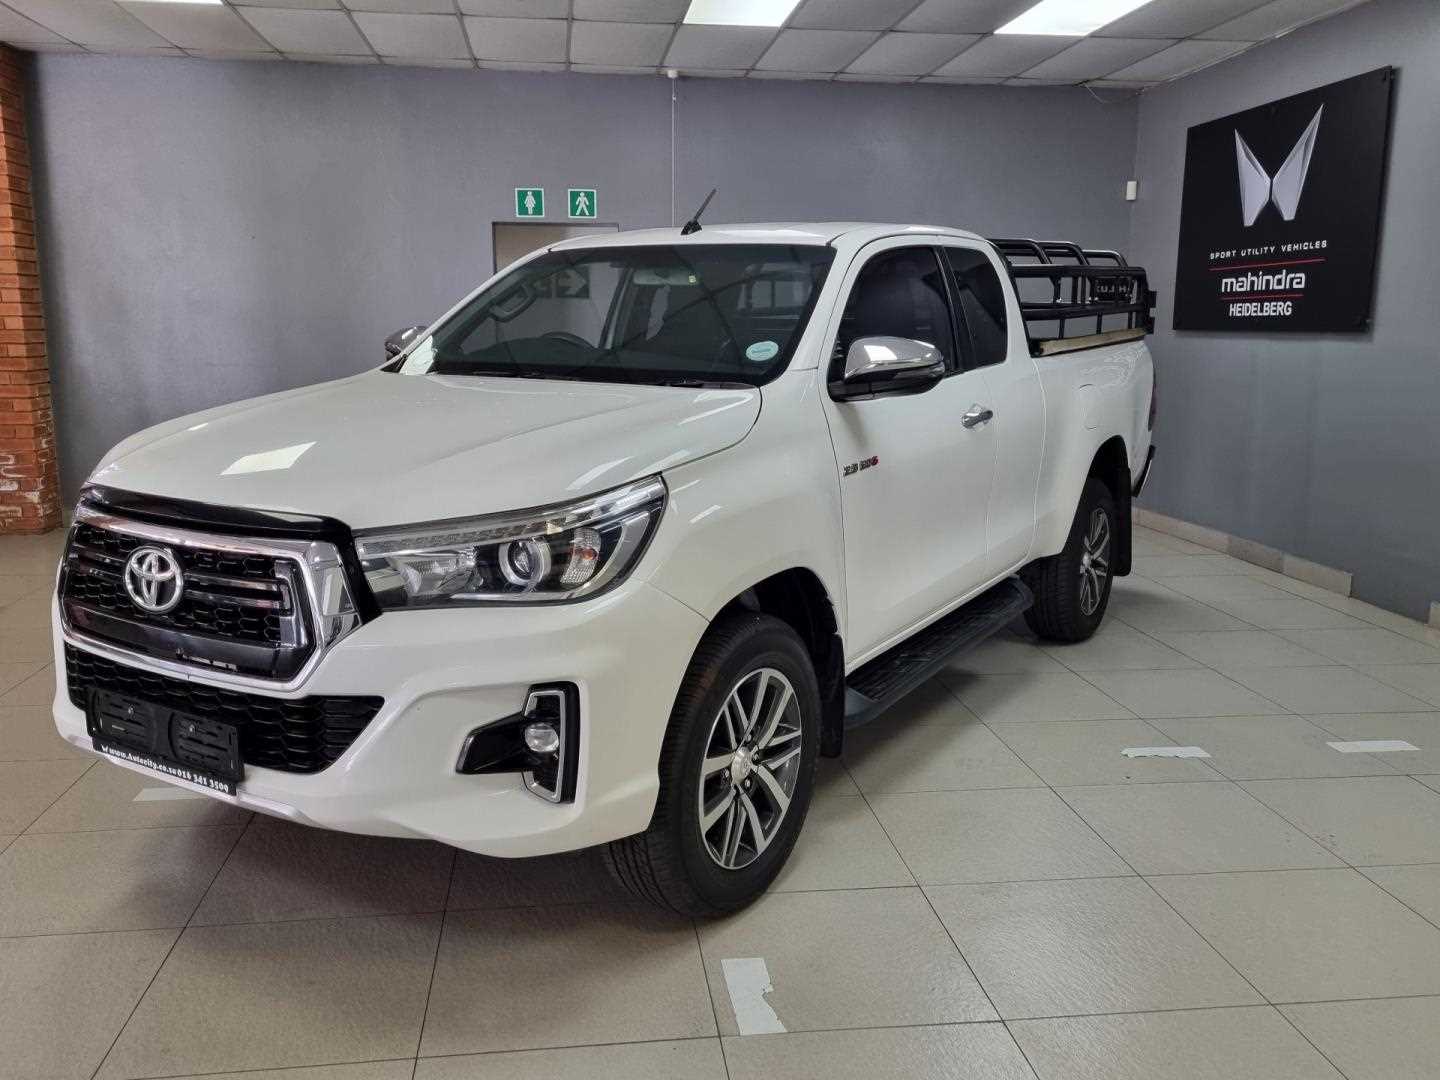 Toyota 2.8 Gd-6 RB Raider Auto Pik Up E-Cab for Sale in South Africa